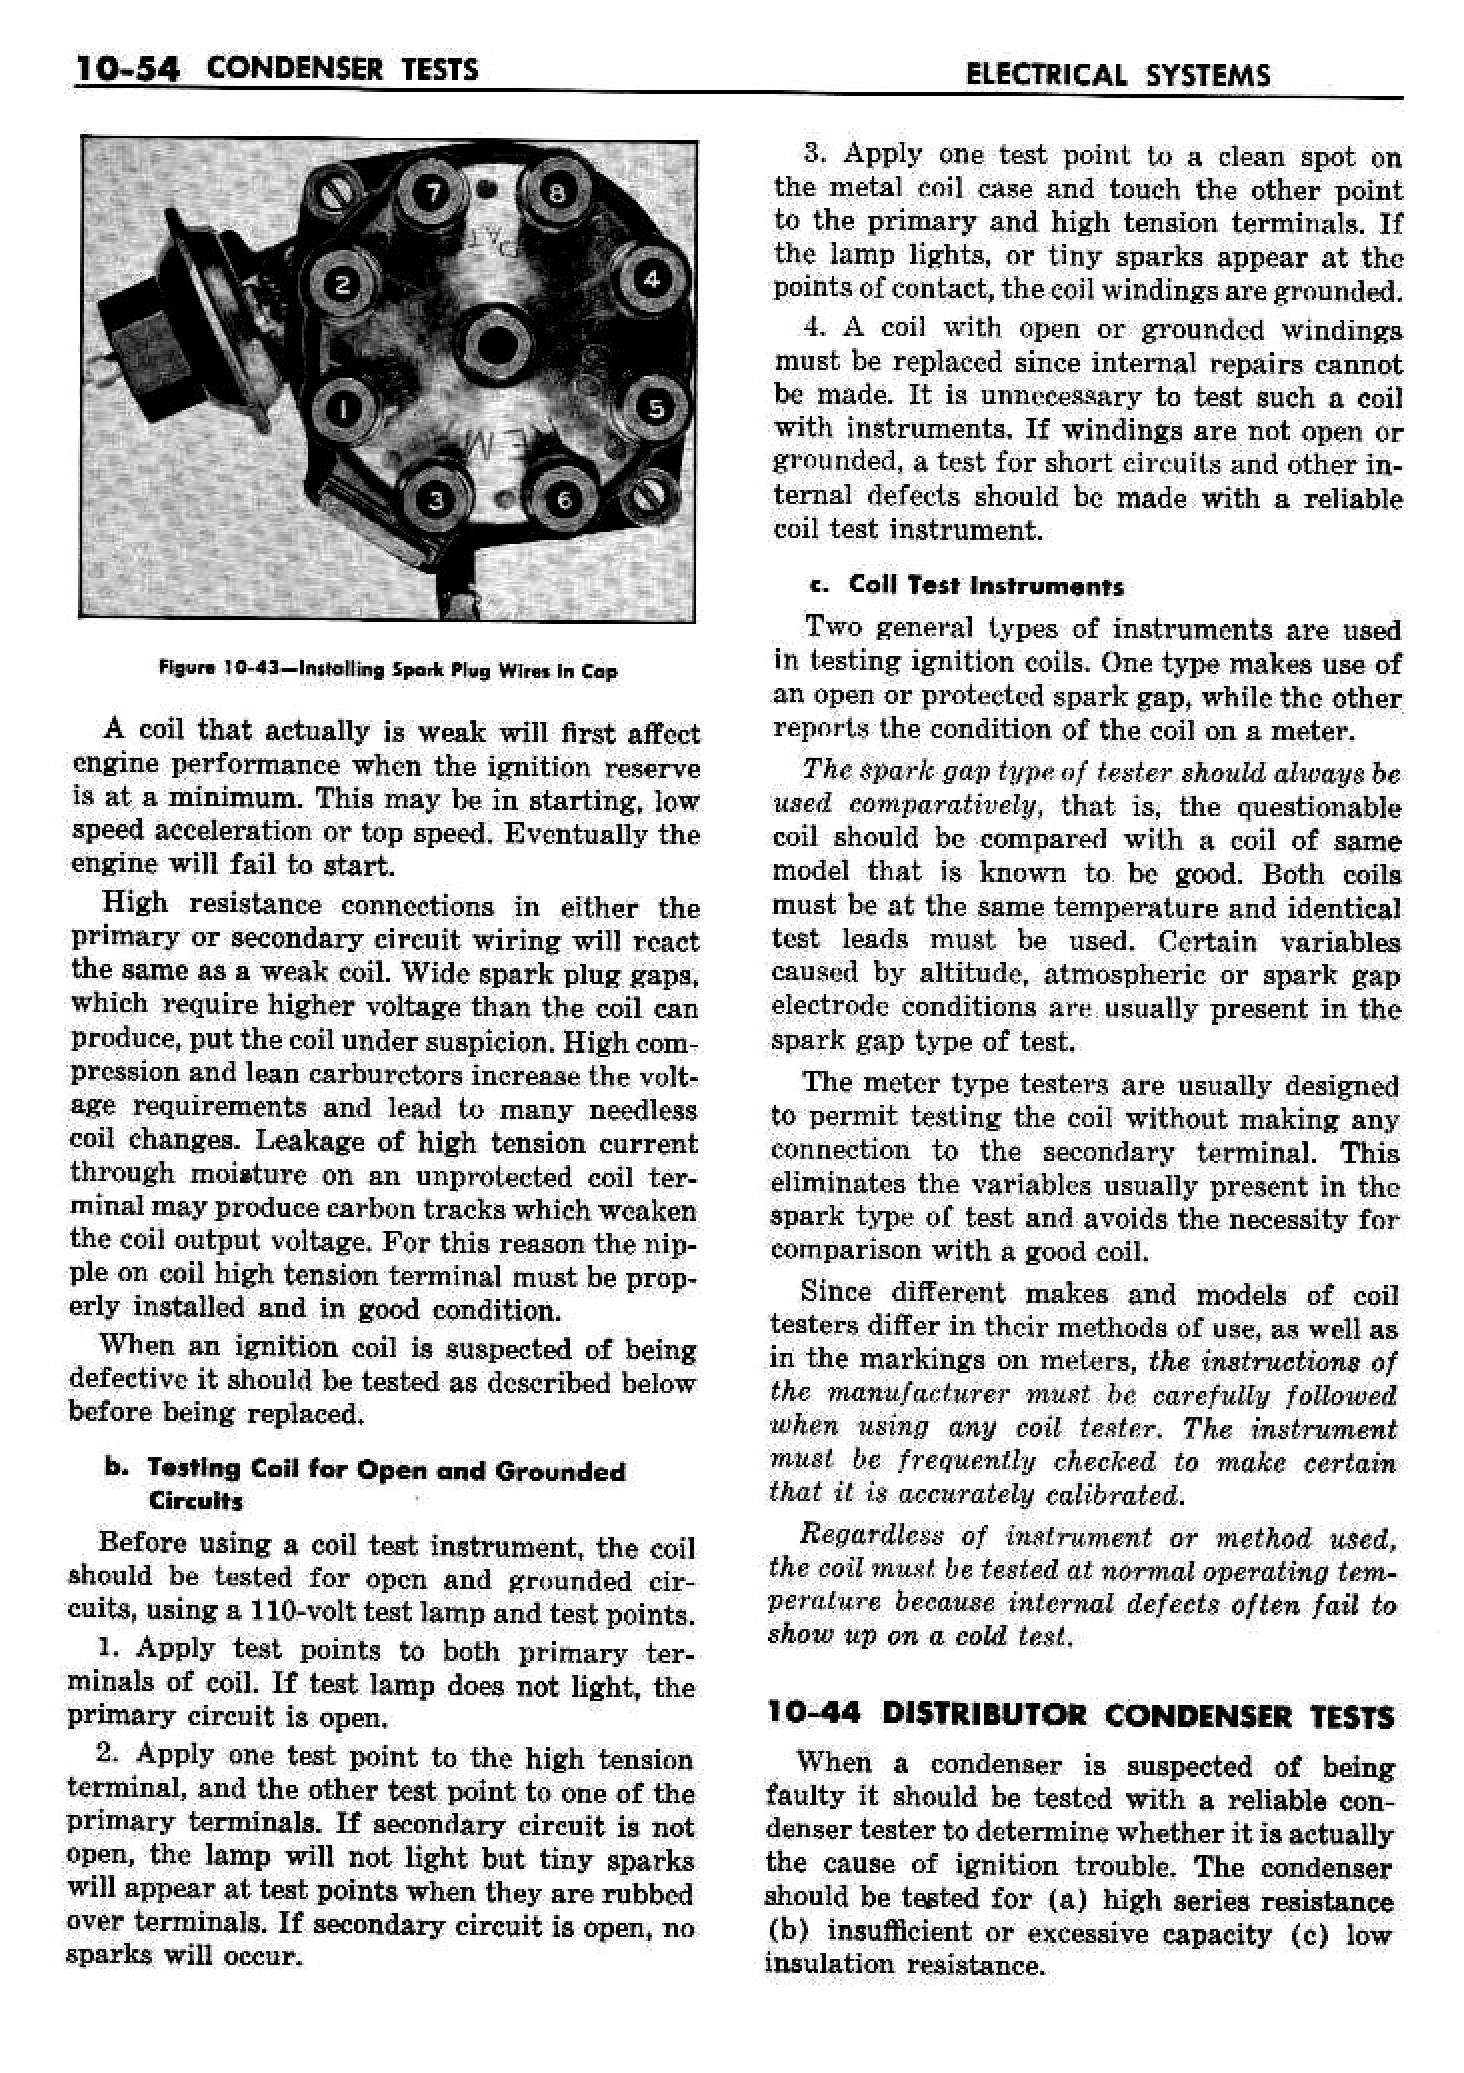 n_11 1958 Buick Shop Manual - Electrical Systems_54.jpg